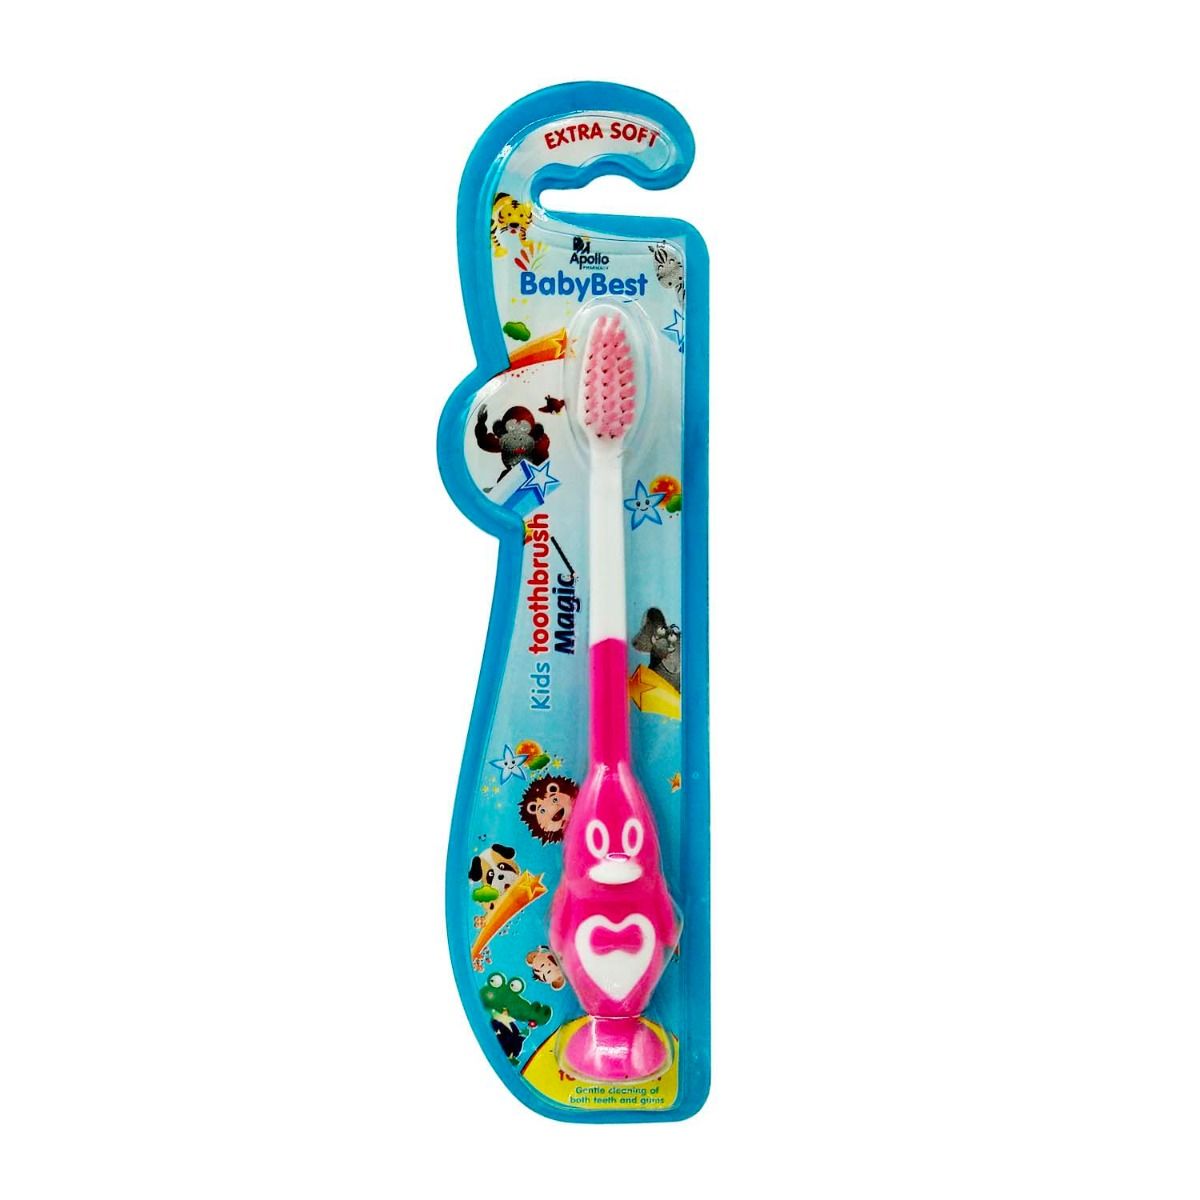 Apollo Pharmacy BabyBest Magic Extra Soft Kids Toothbrush, 1 Count, Pack of 1 